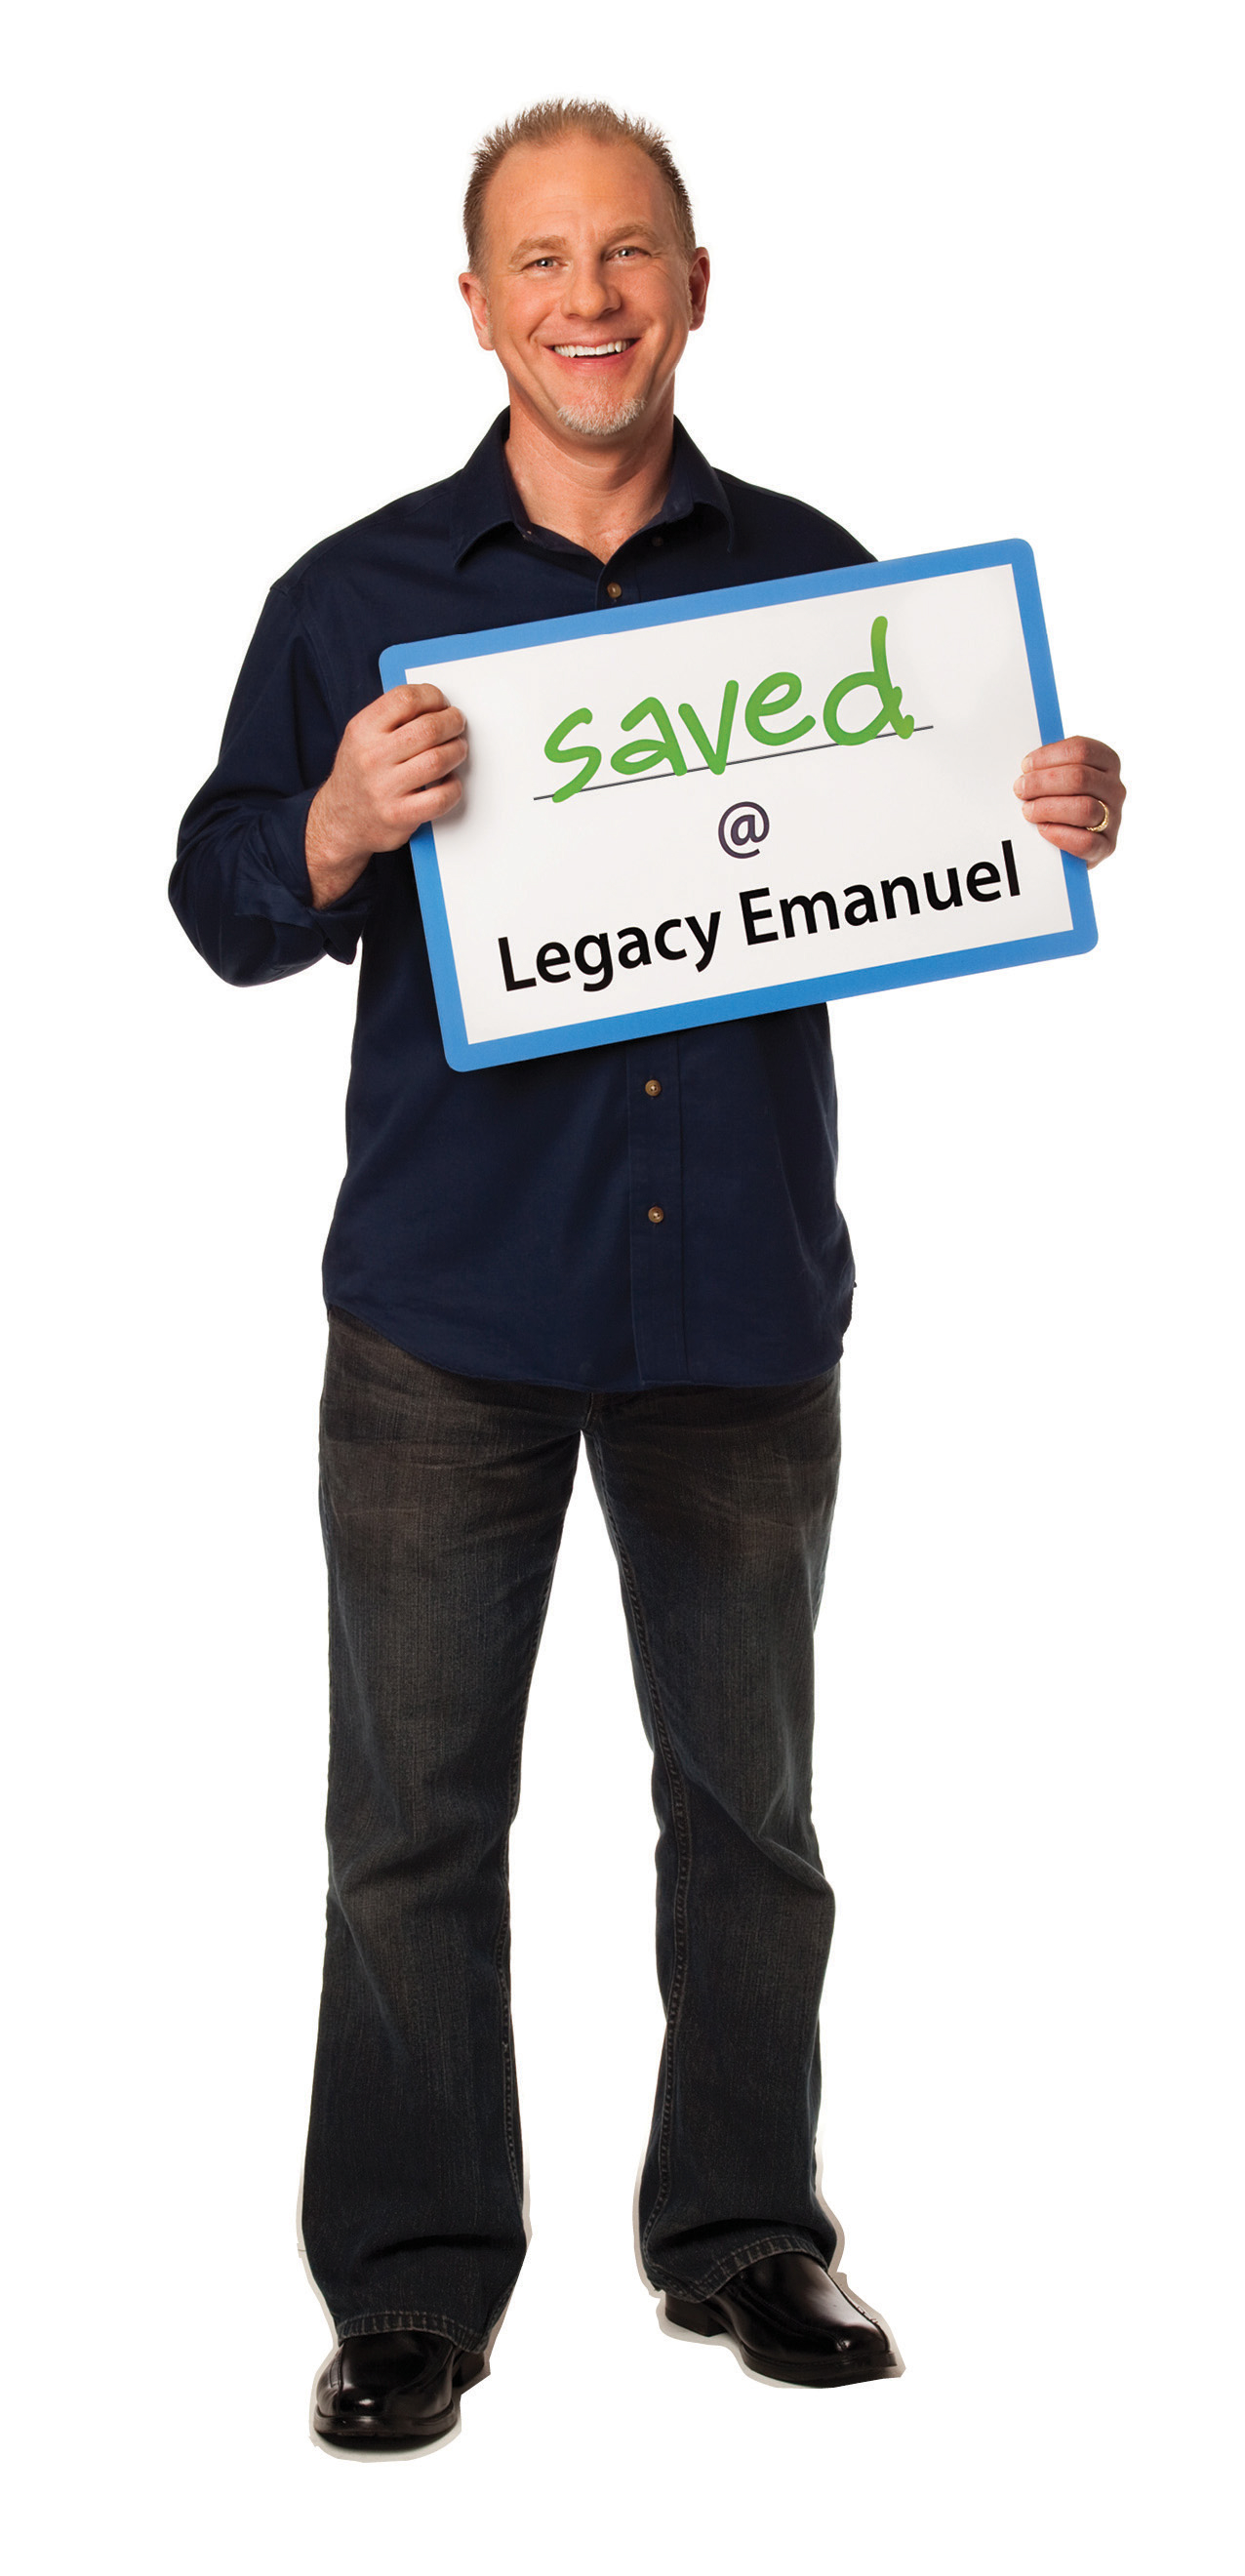 Legacy Health
Tom Trautman as featured in a Legacy Health media campaign.